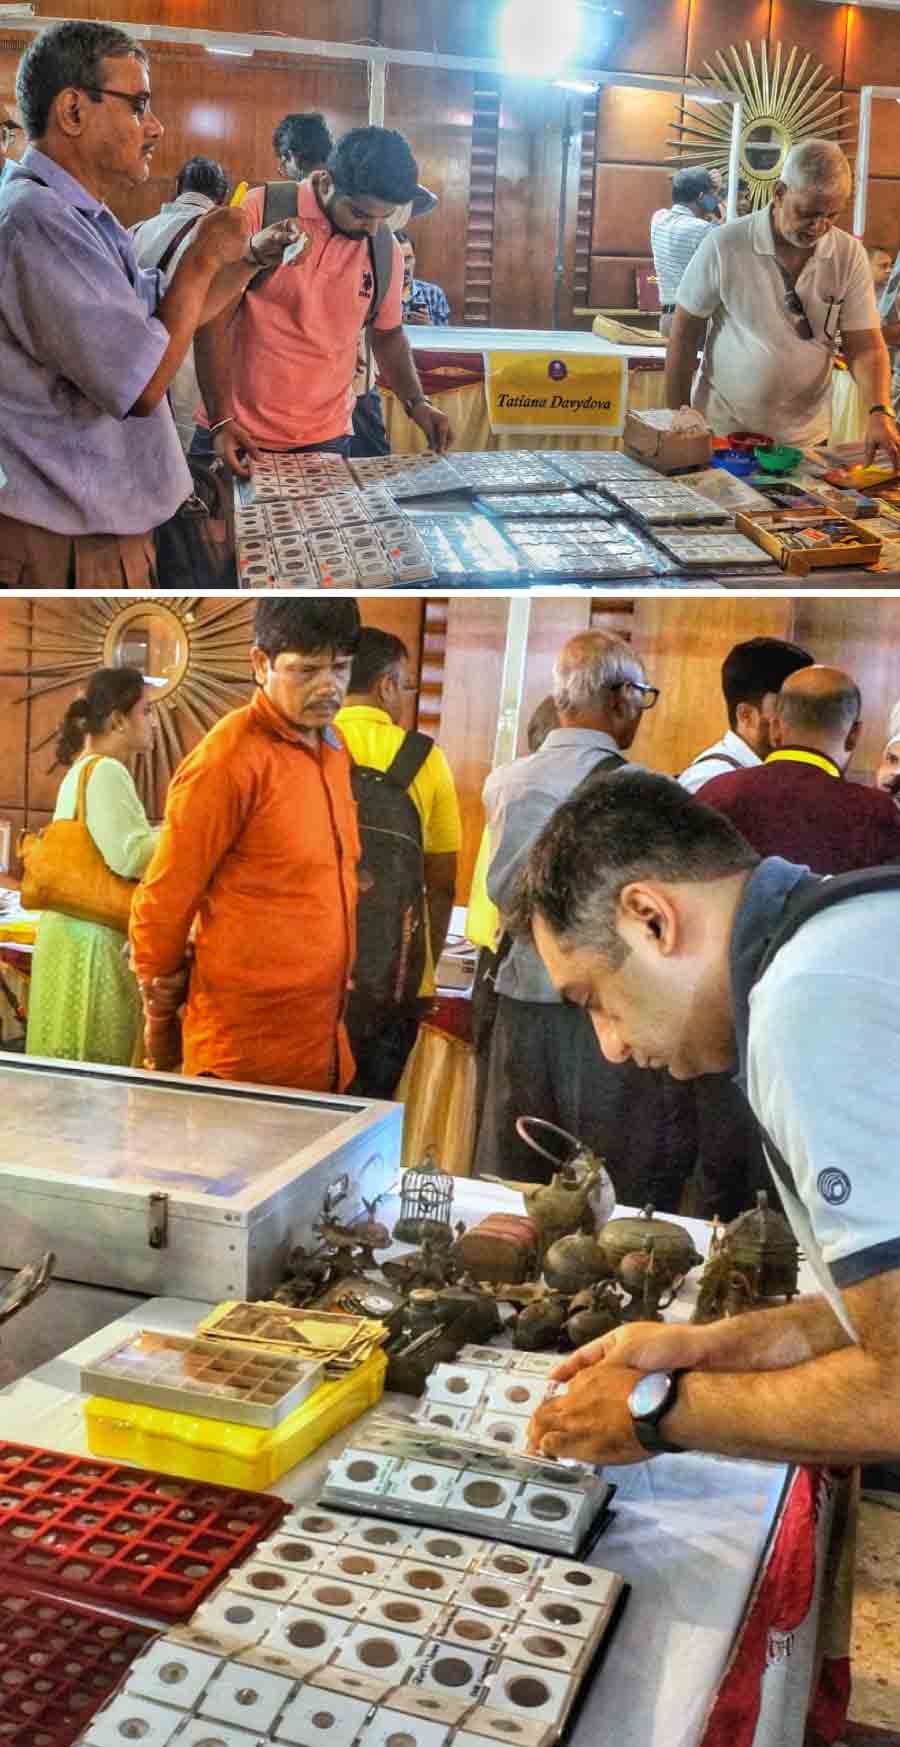 Visitors had an engaging time browsing through hundreds of exhibits at the Coin Fest at Haldiram’s banquet hall in Ballygunge on Saturday afternoon. The event will continue till Sunday from 11am to 6pm